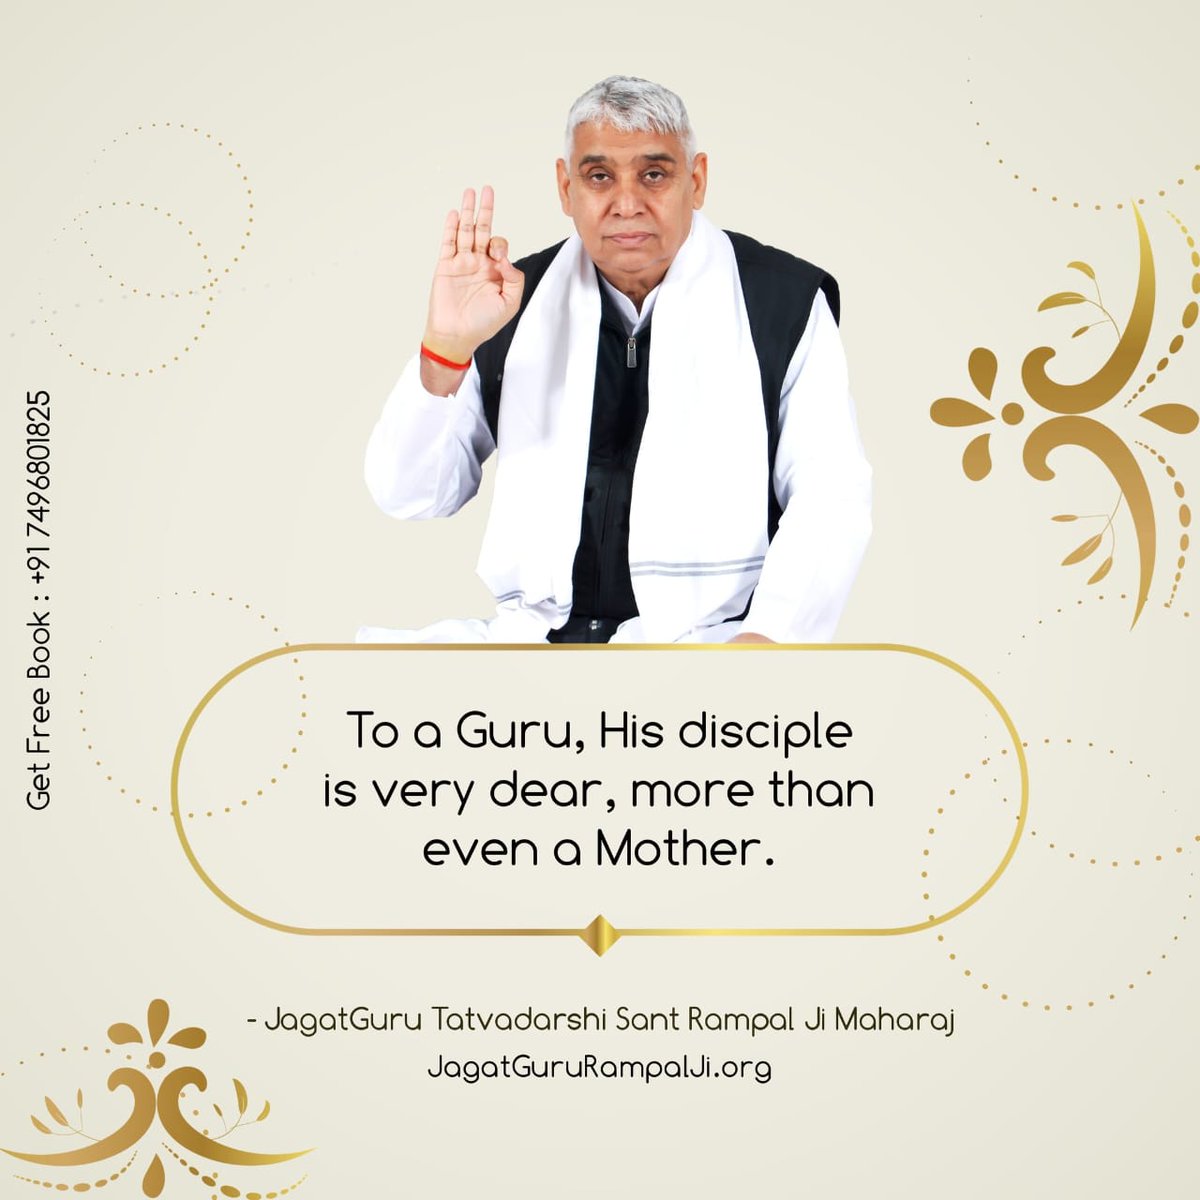 #GodMorningThursday
To a Guru, His disciple is very dear, more than even a Mother.
📚Must read spiritual book 'Gyan - Ganga'.
for free book
Send full name, address.
+91 7496801825